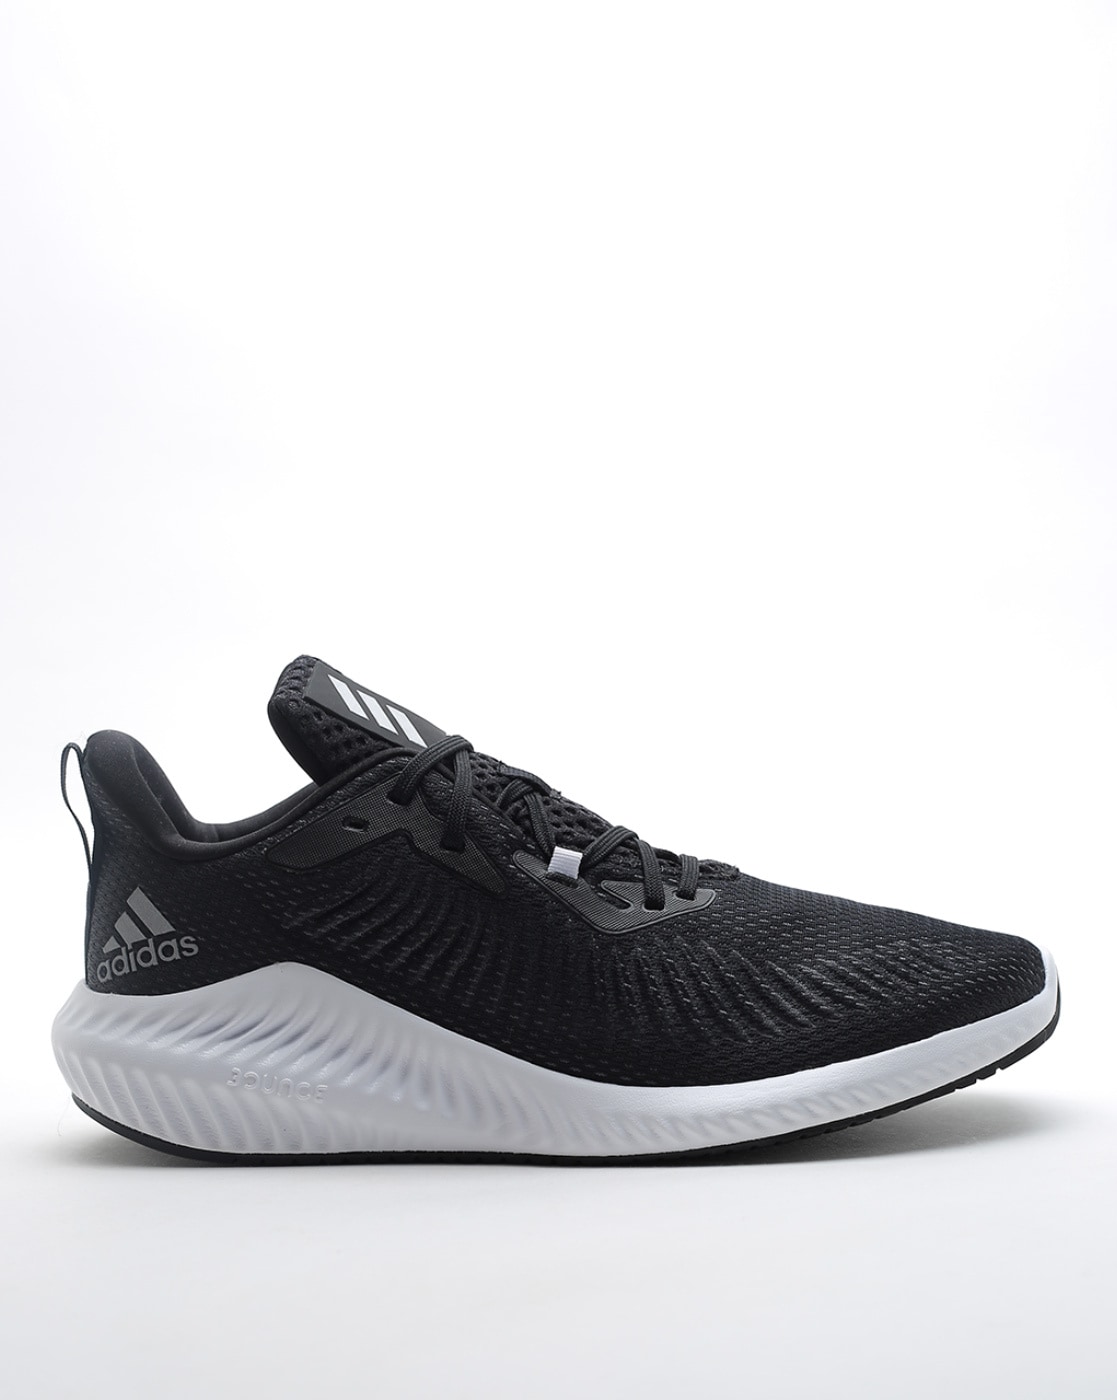 Adidas Alphabounce EM Men's Running Shoes Black Grey Four Size 8.5 BY4263 |  eBay